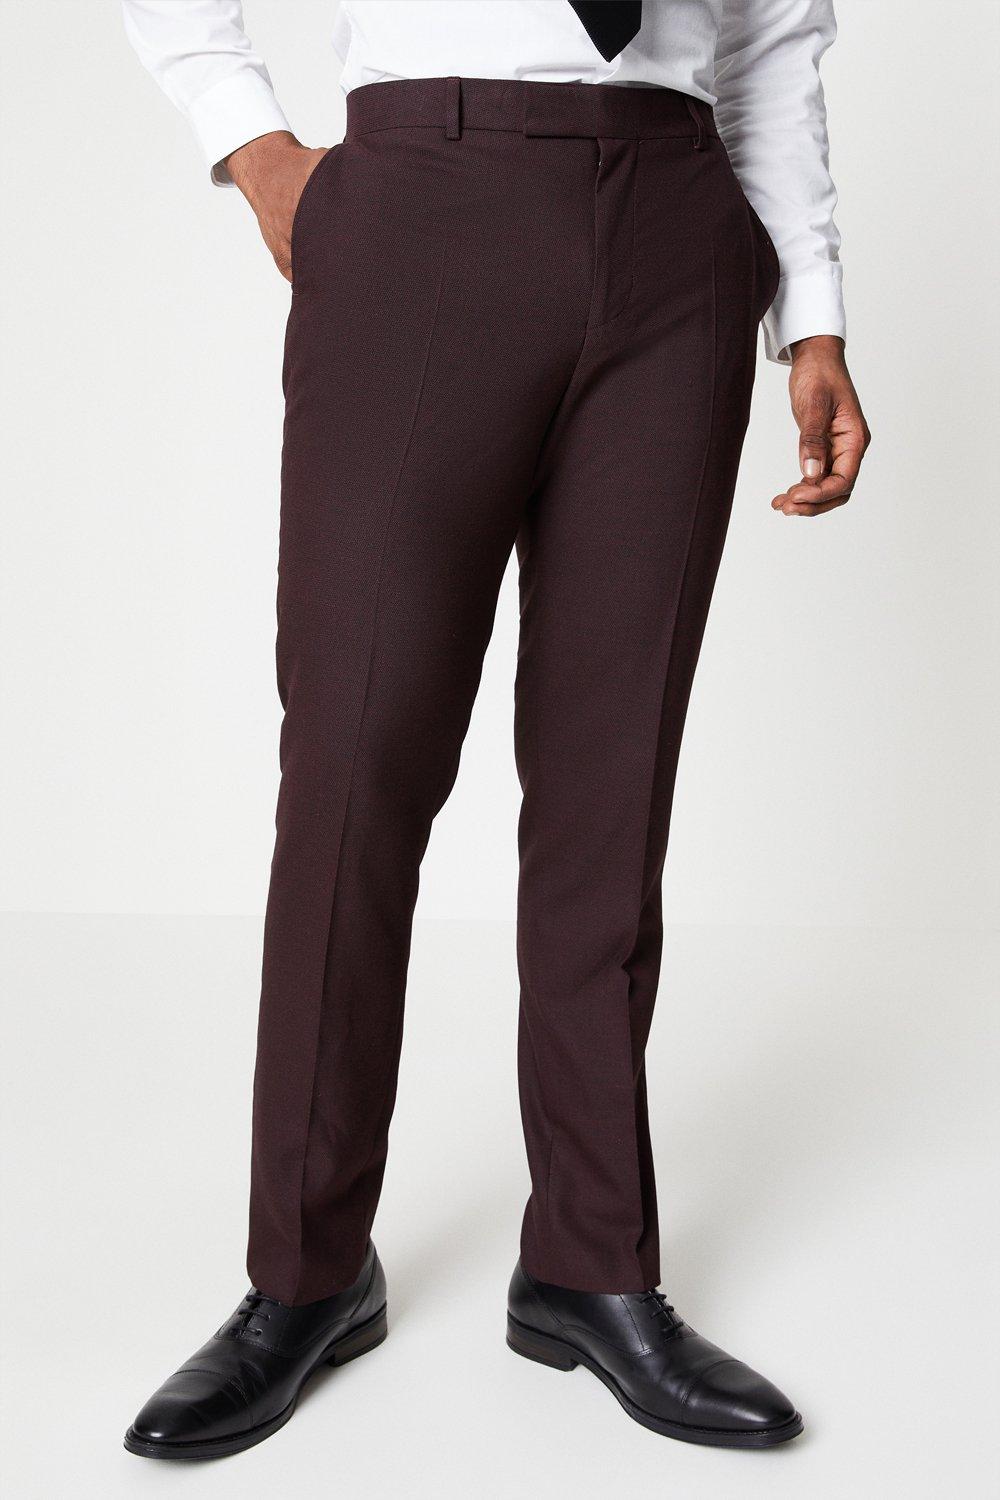 Mens Burgundy Tipped Suit Trouser